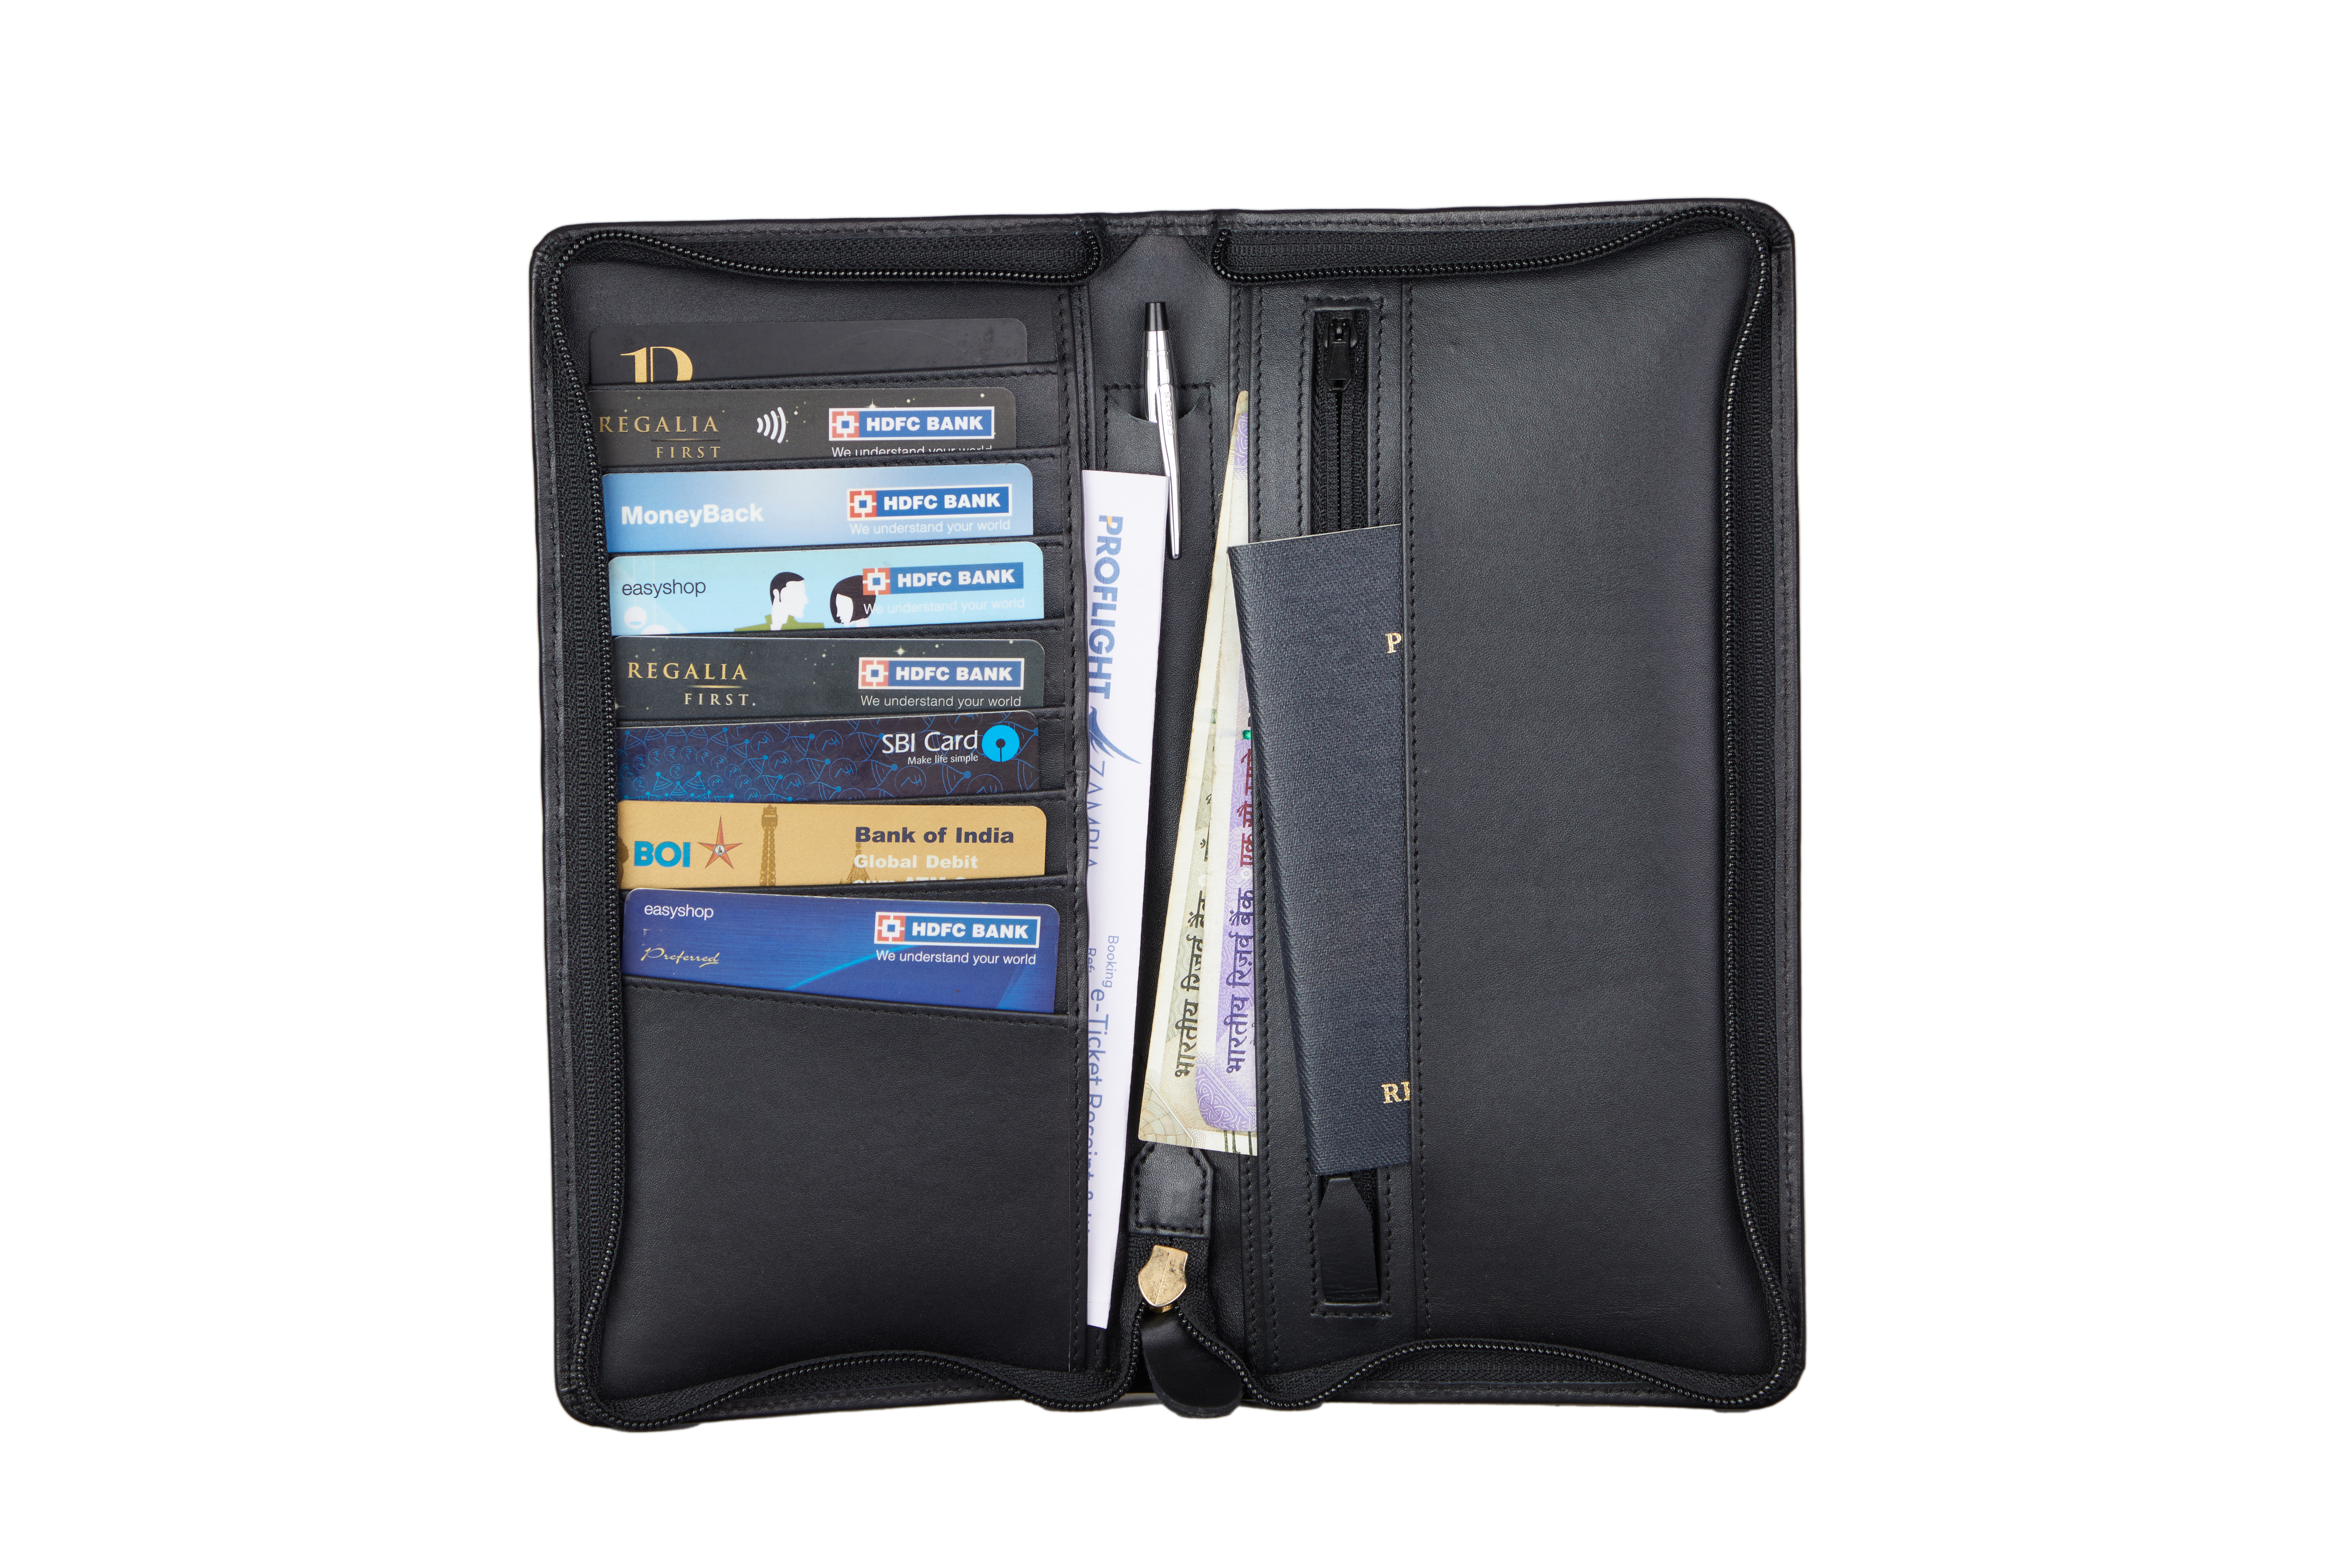 W13-Pablo-Travel document wallet in Genuine Leather - Black